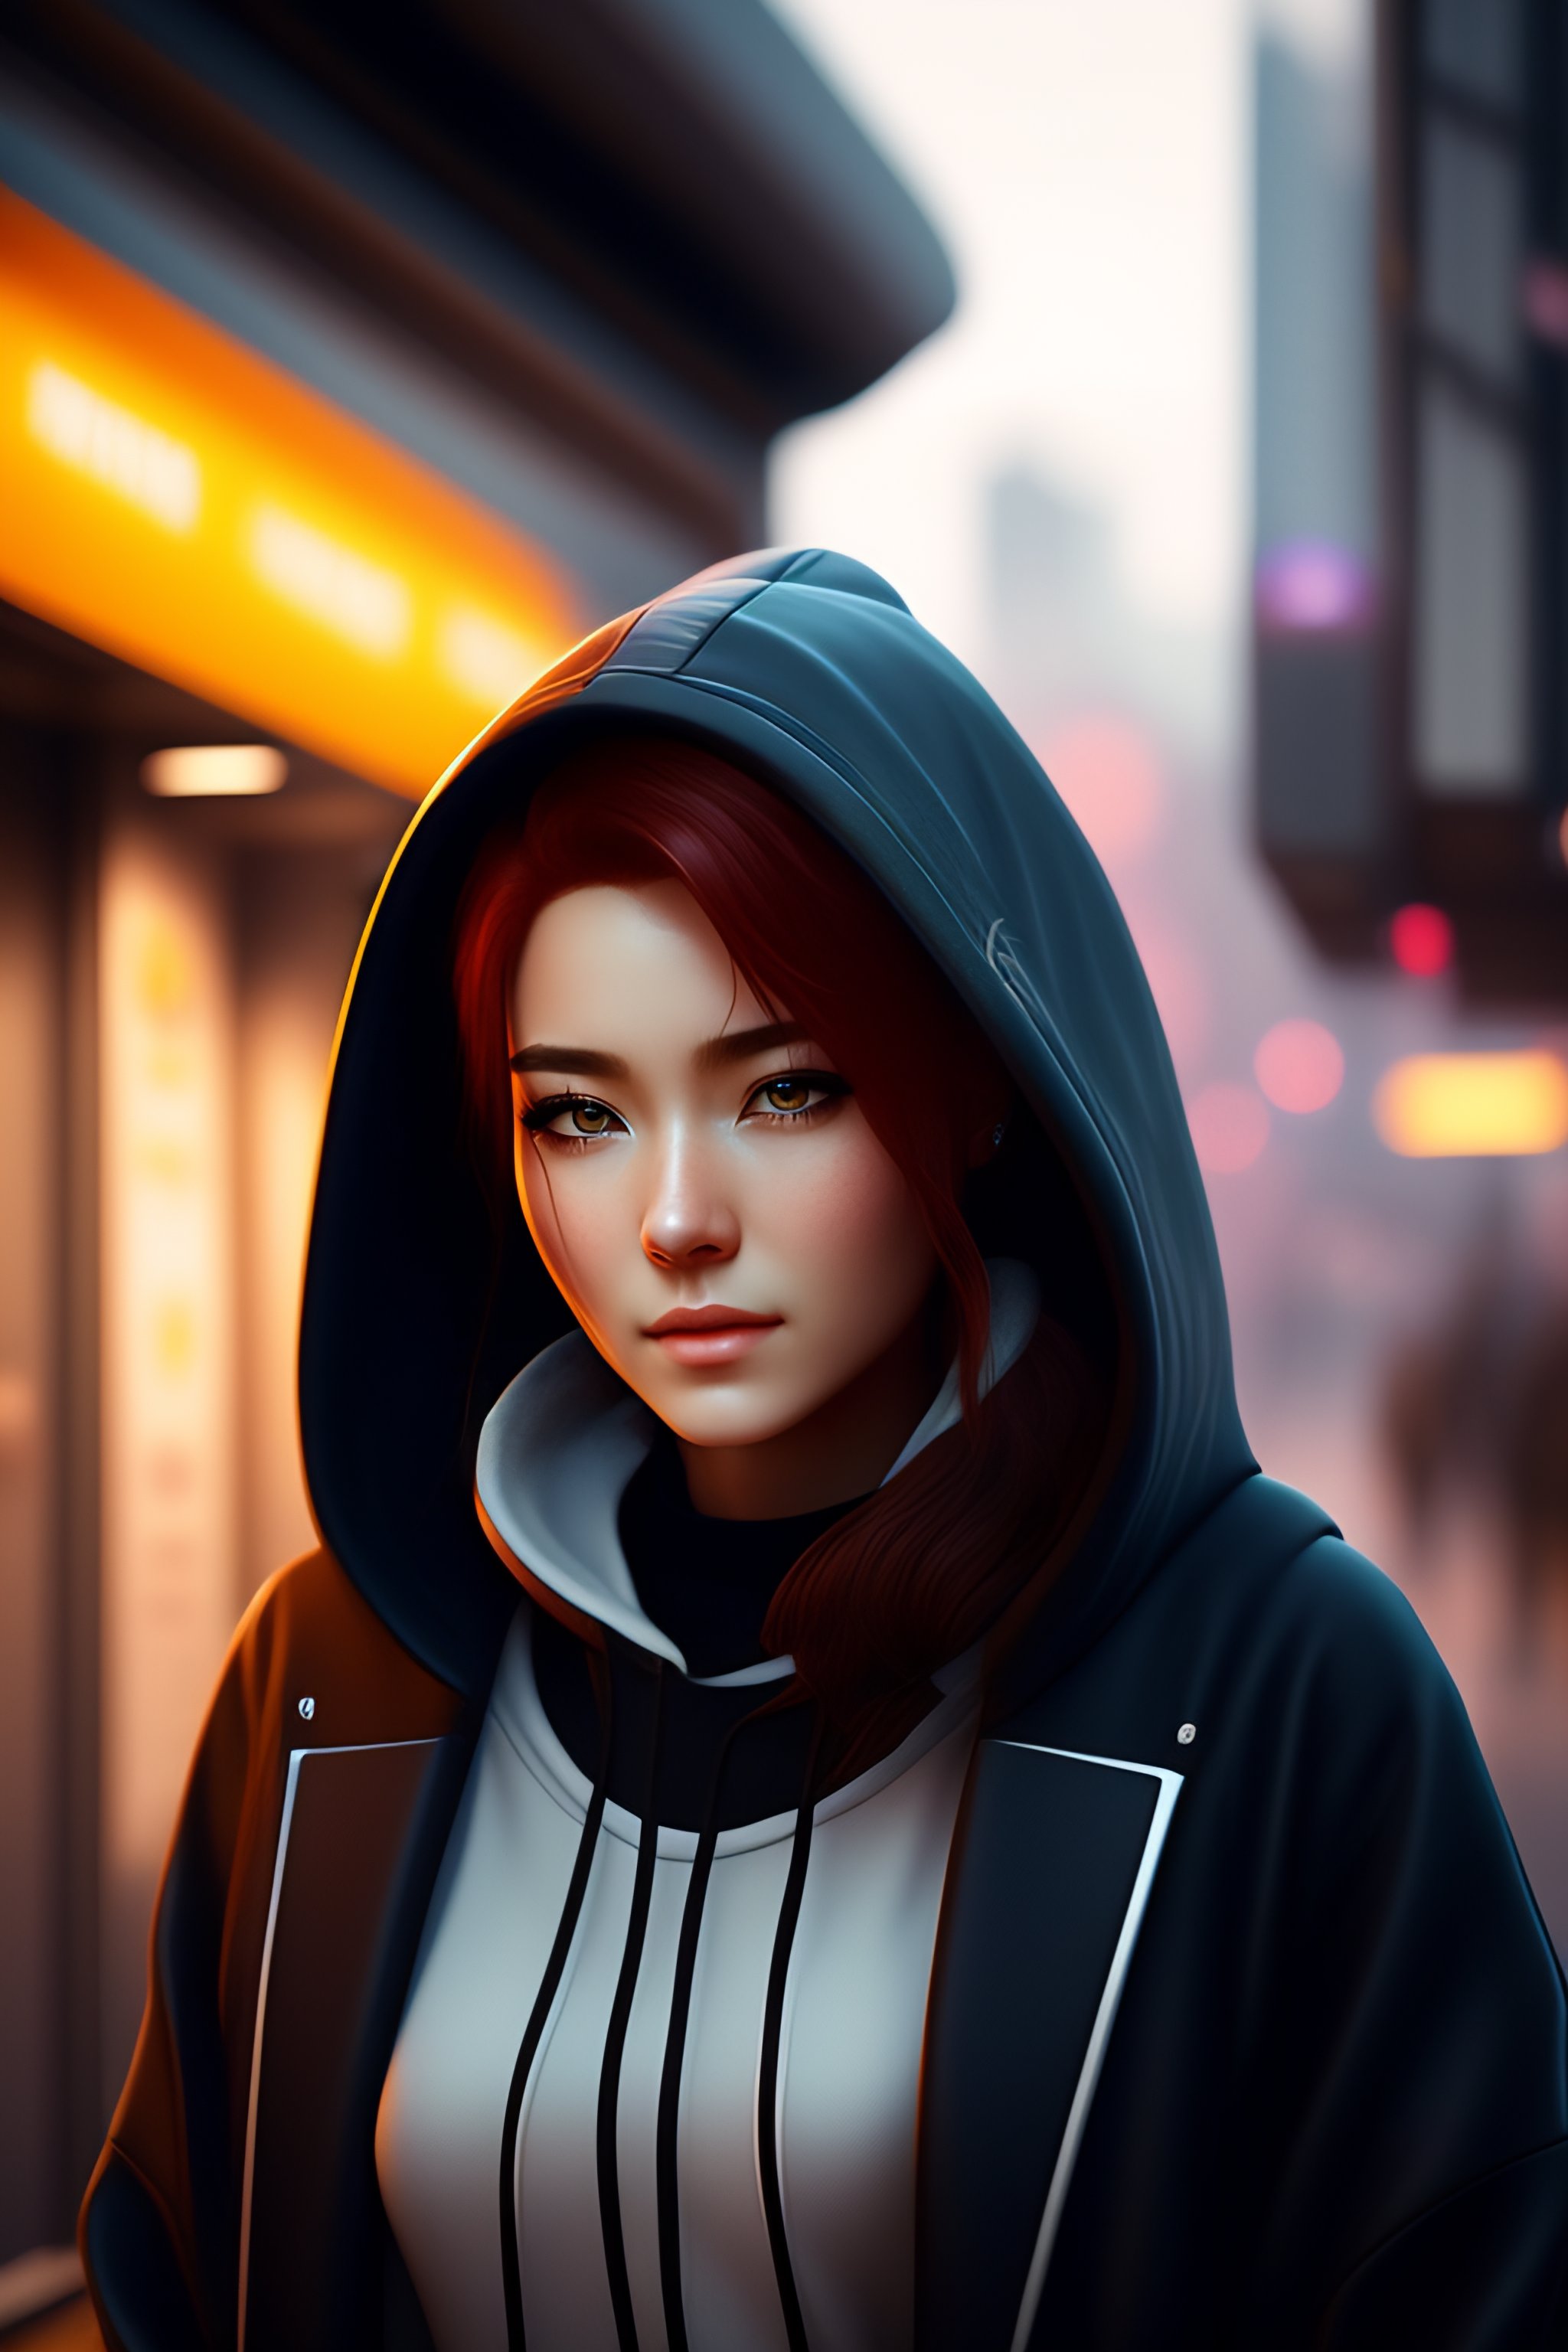 Lexica Cyberpunk City Setting Realistic Young Anime White Woman Wearing A Hoodie Under A 7651